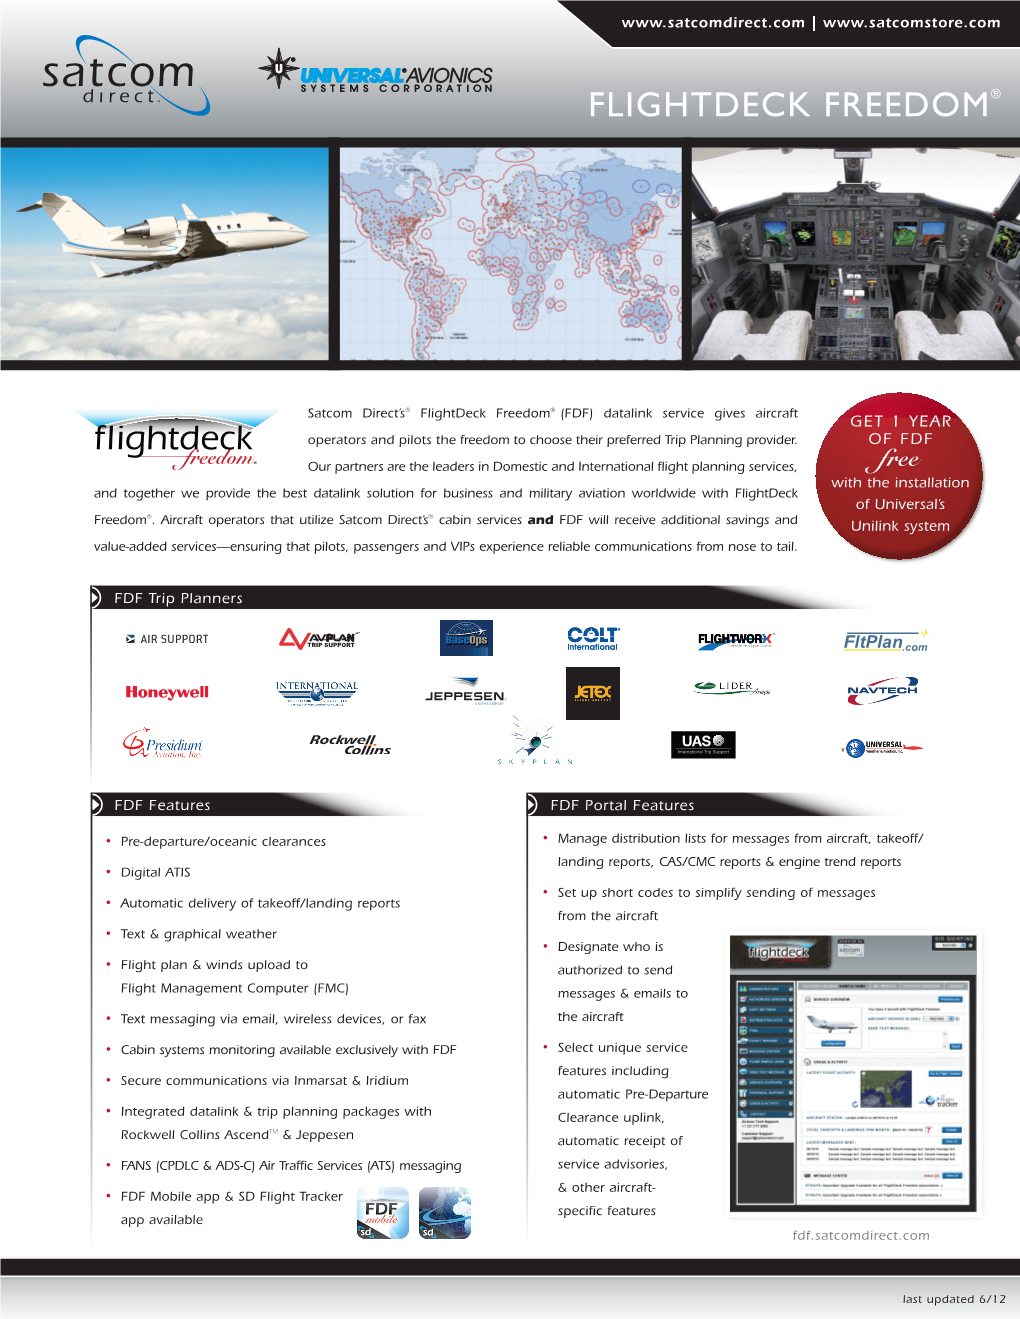 Flightdeck Freedom® (FDF) Datalink Service Gives Aircraft Get 1 Year Operators and Pilots the Freedom to Choose Their Preferred Trip Planning Provider